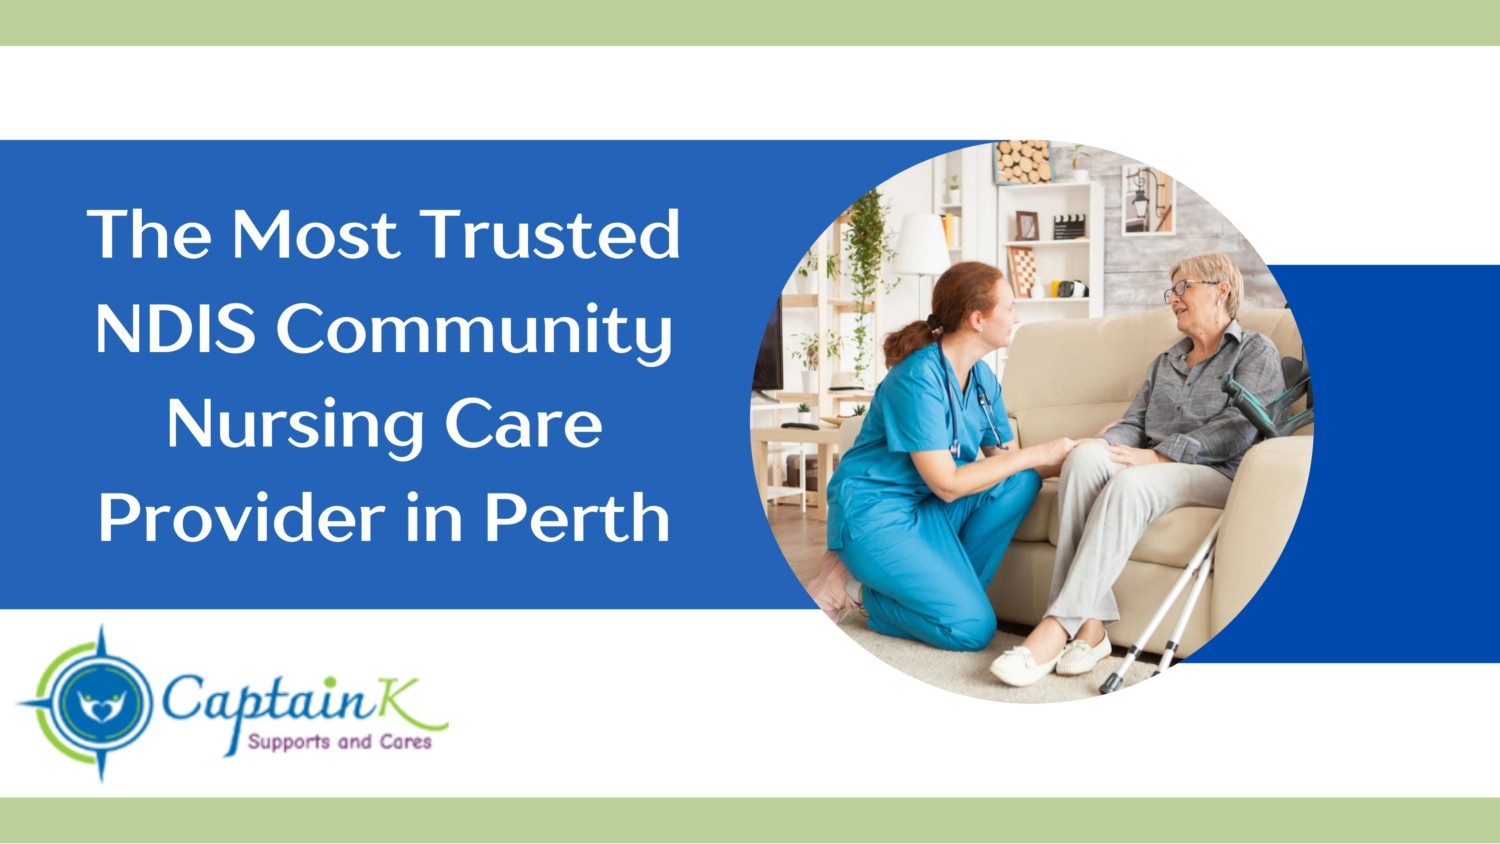 The Most Trusted NDIS Community Nursing Care Provider in Perth